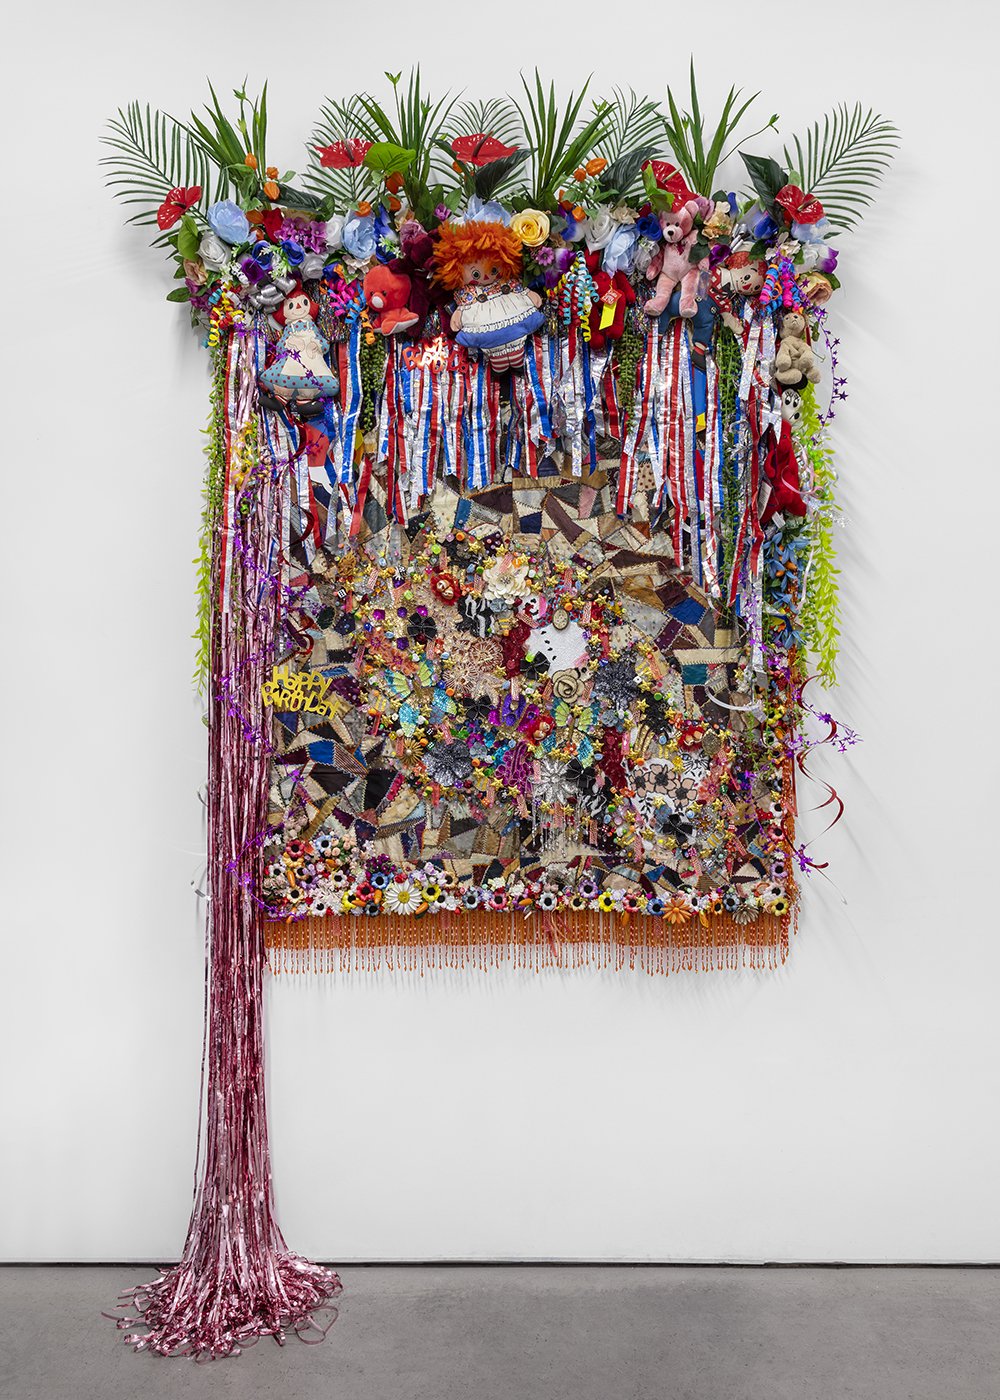   Shroud #8 , 2022, Found ‘Crazy’ quilt ca. 1900, trim, fabric flowers, streamers, banners, garland, paper cut-outs, toys, ribbon, costume jewelry, buttons, plastic flowers and fauna, beads, sequins, thread, fabric, Douglas fir, 95 x 63 x 12” 